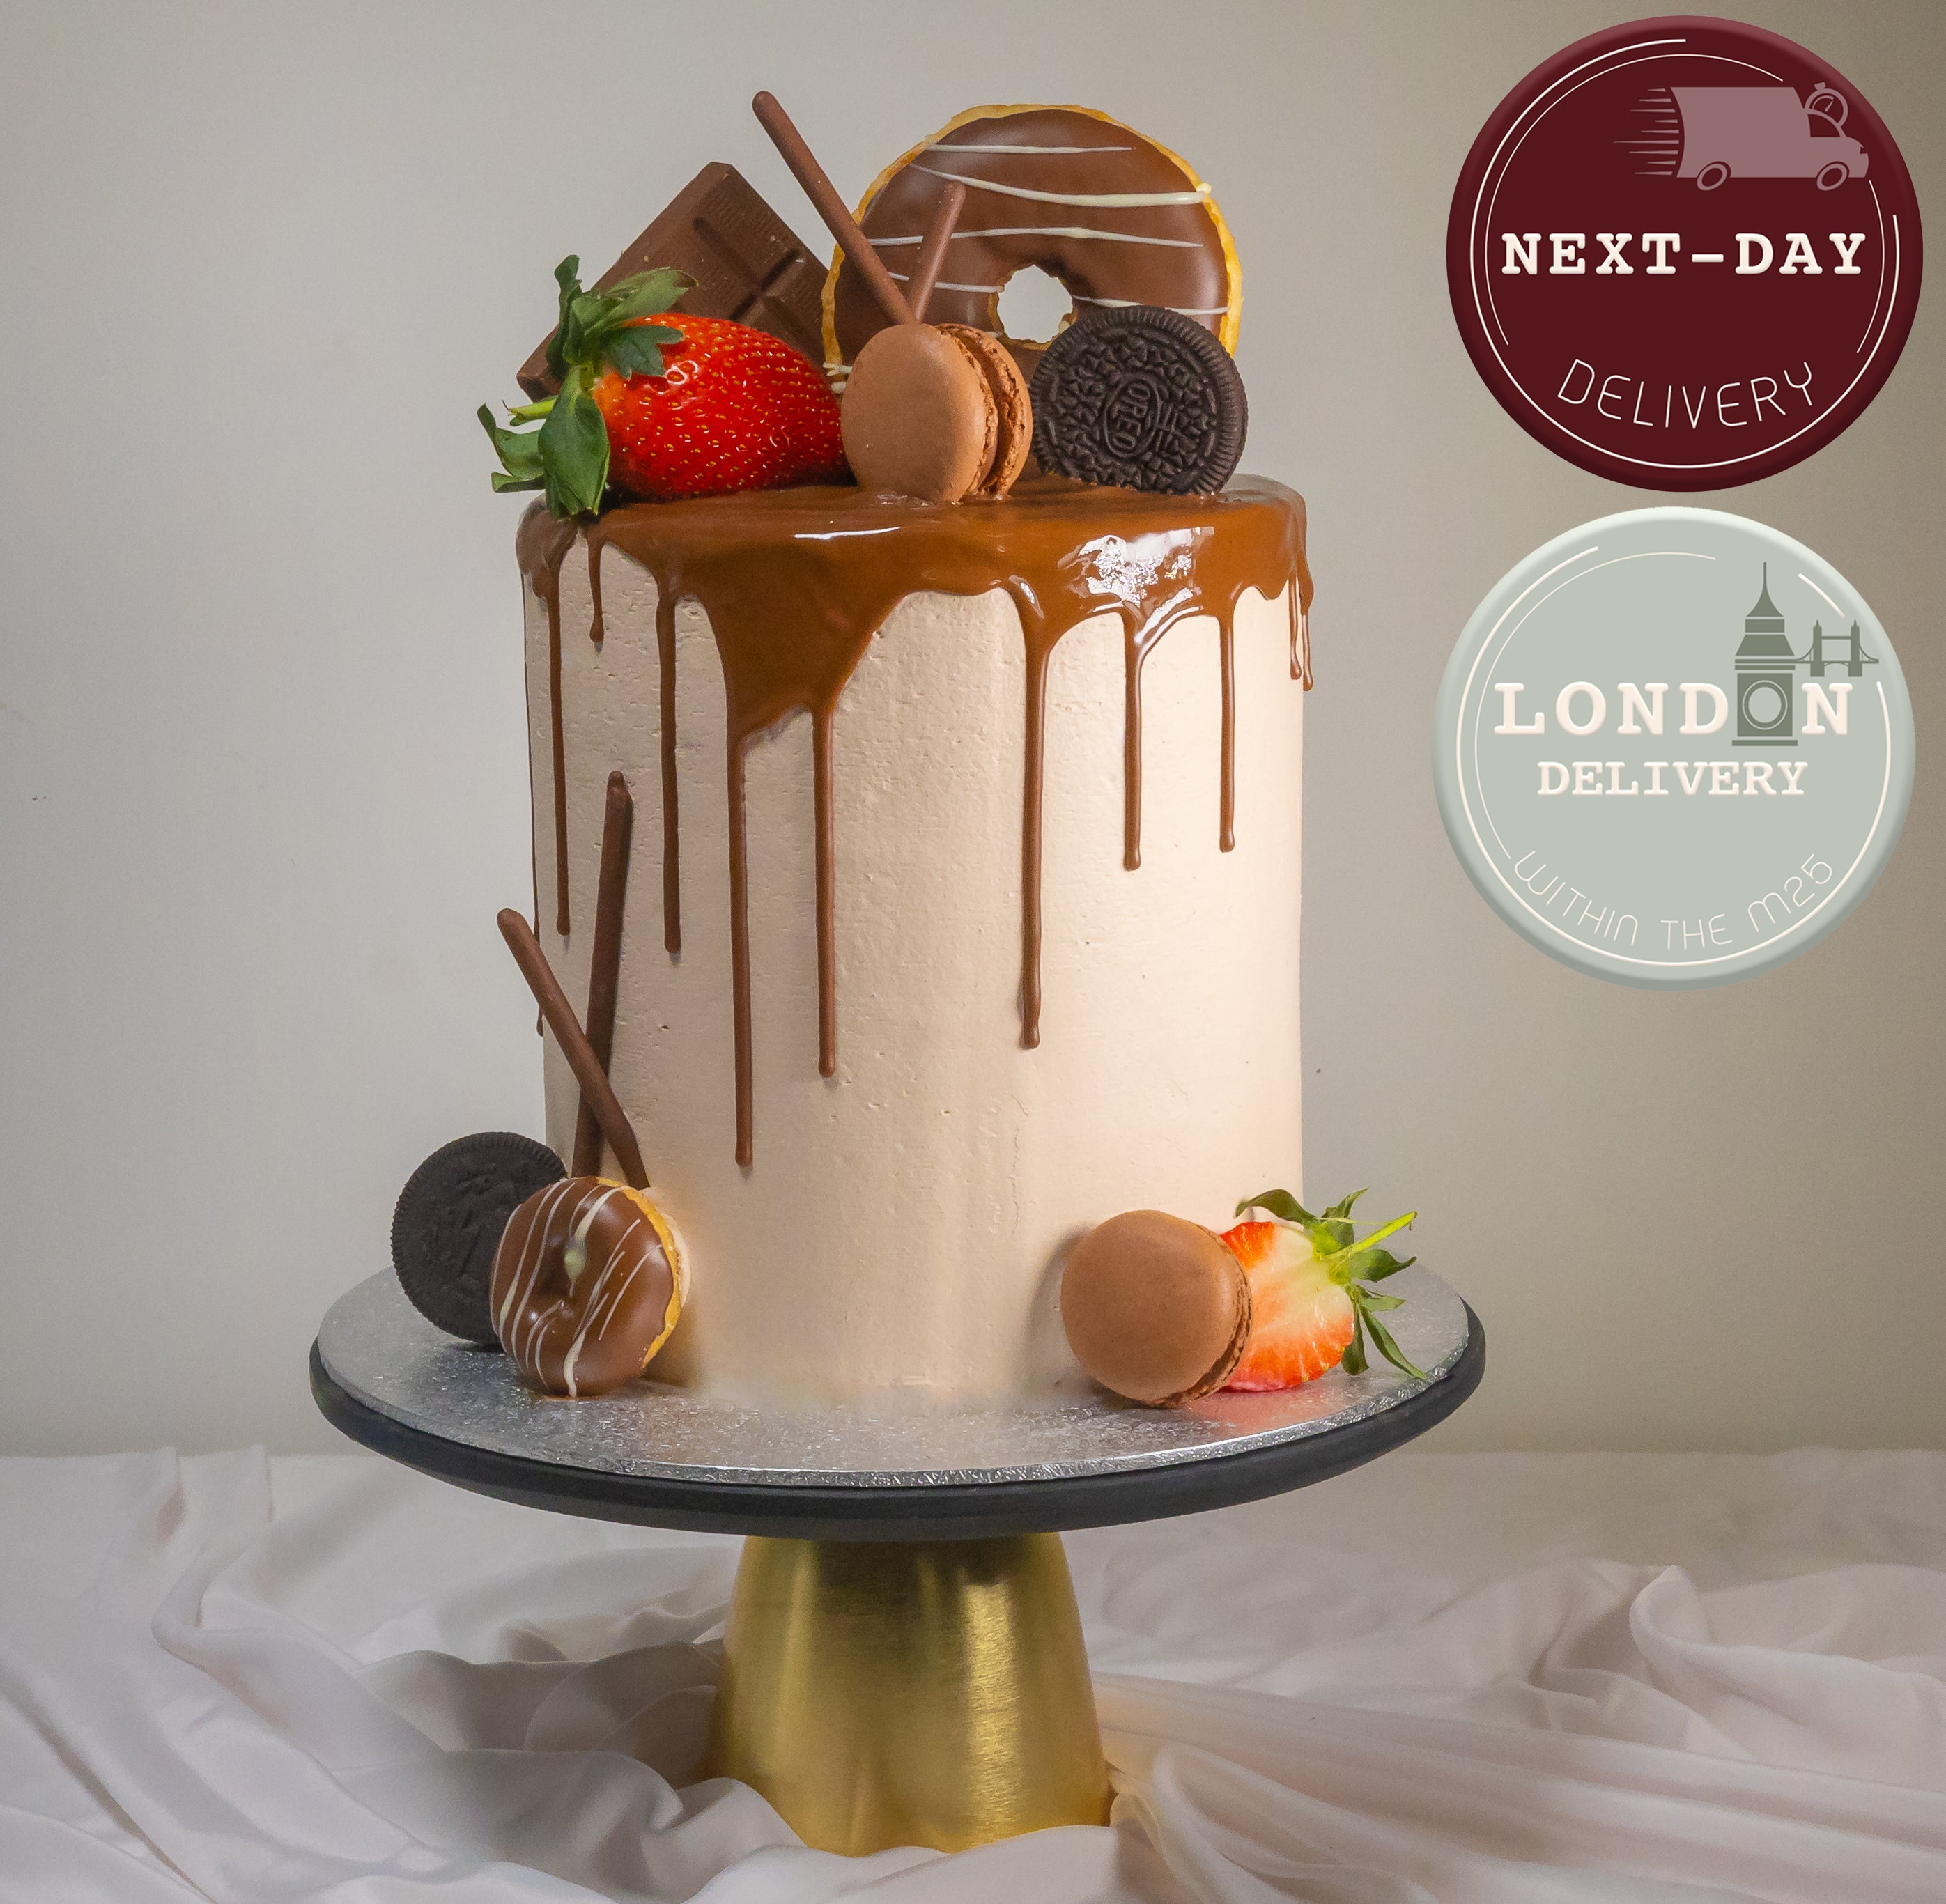 Buy Cakes Online, 100% Fresh w/ Fast Delivery in London